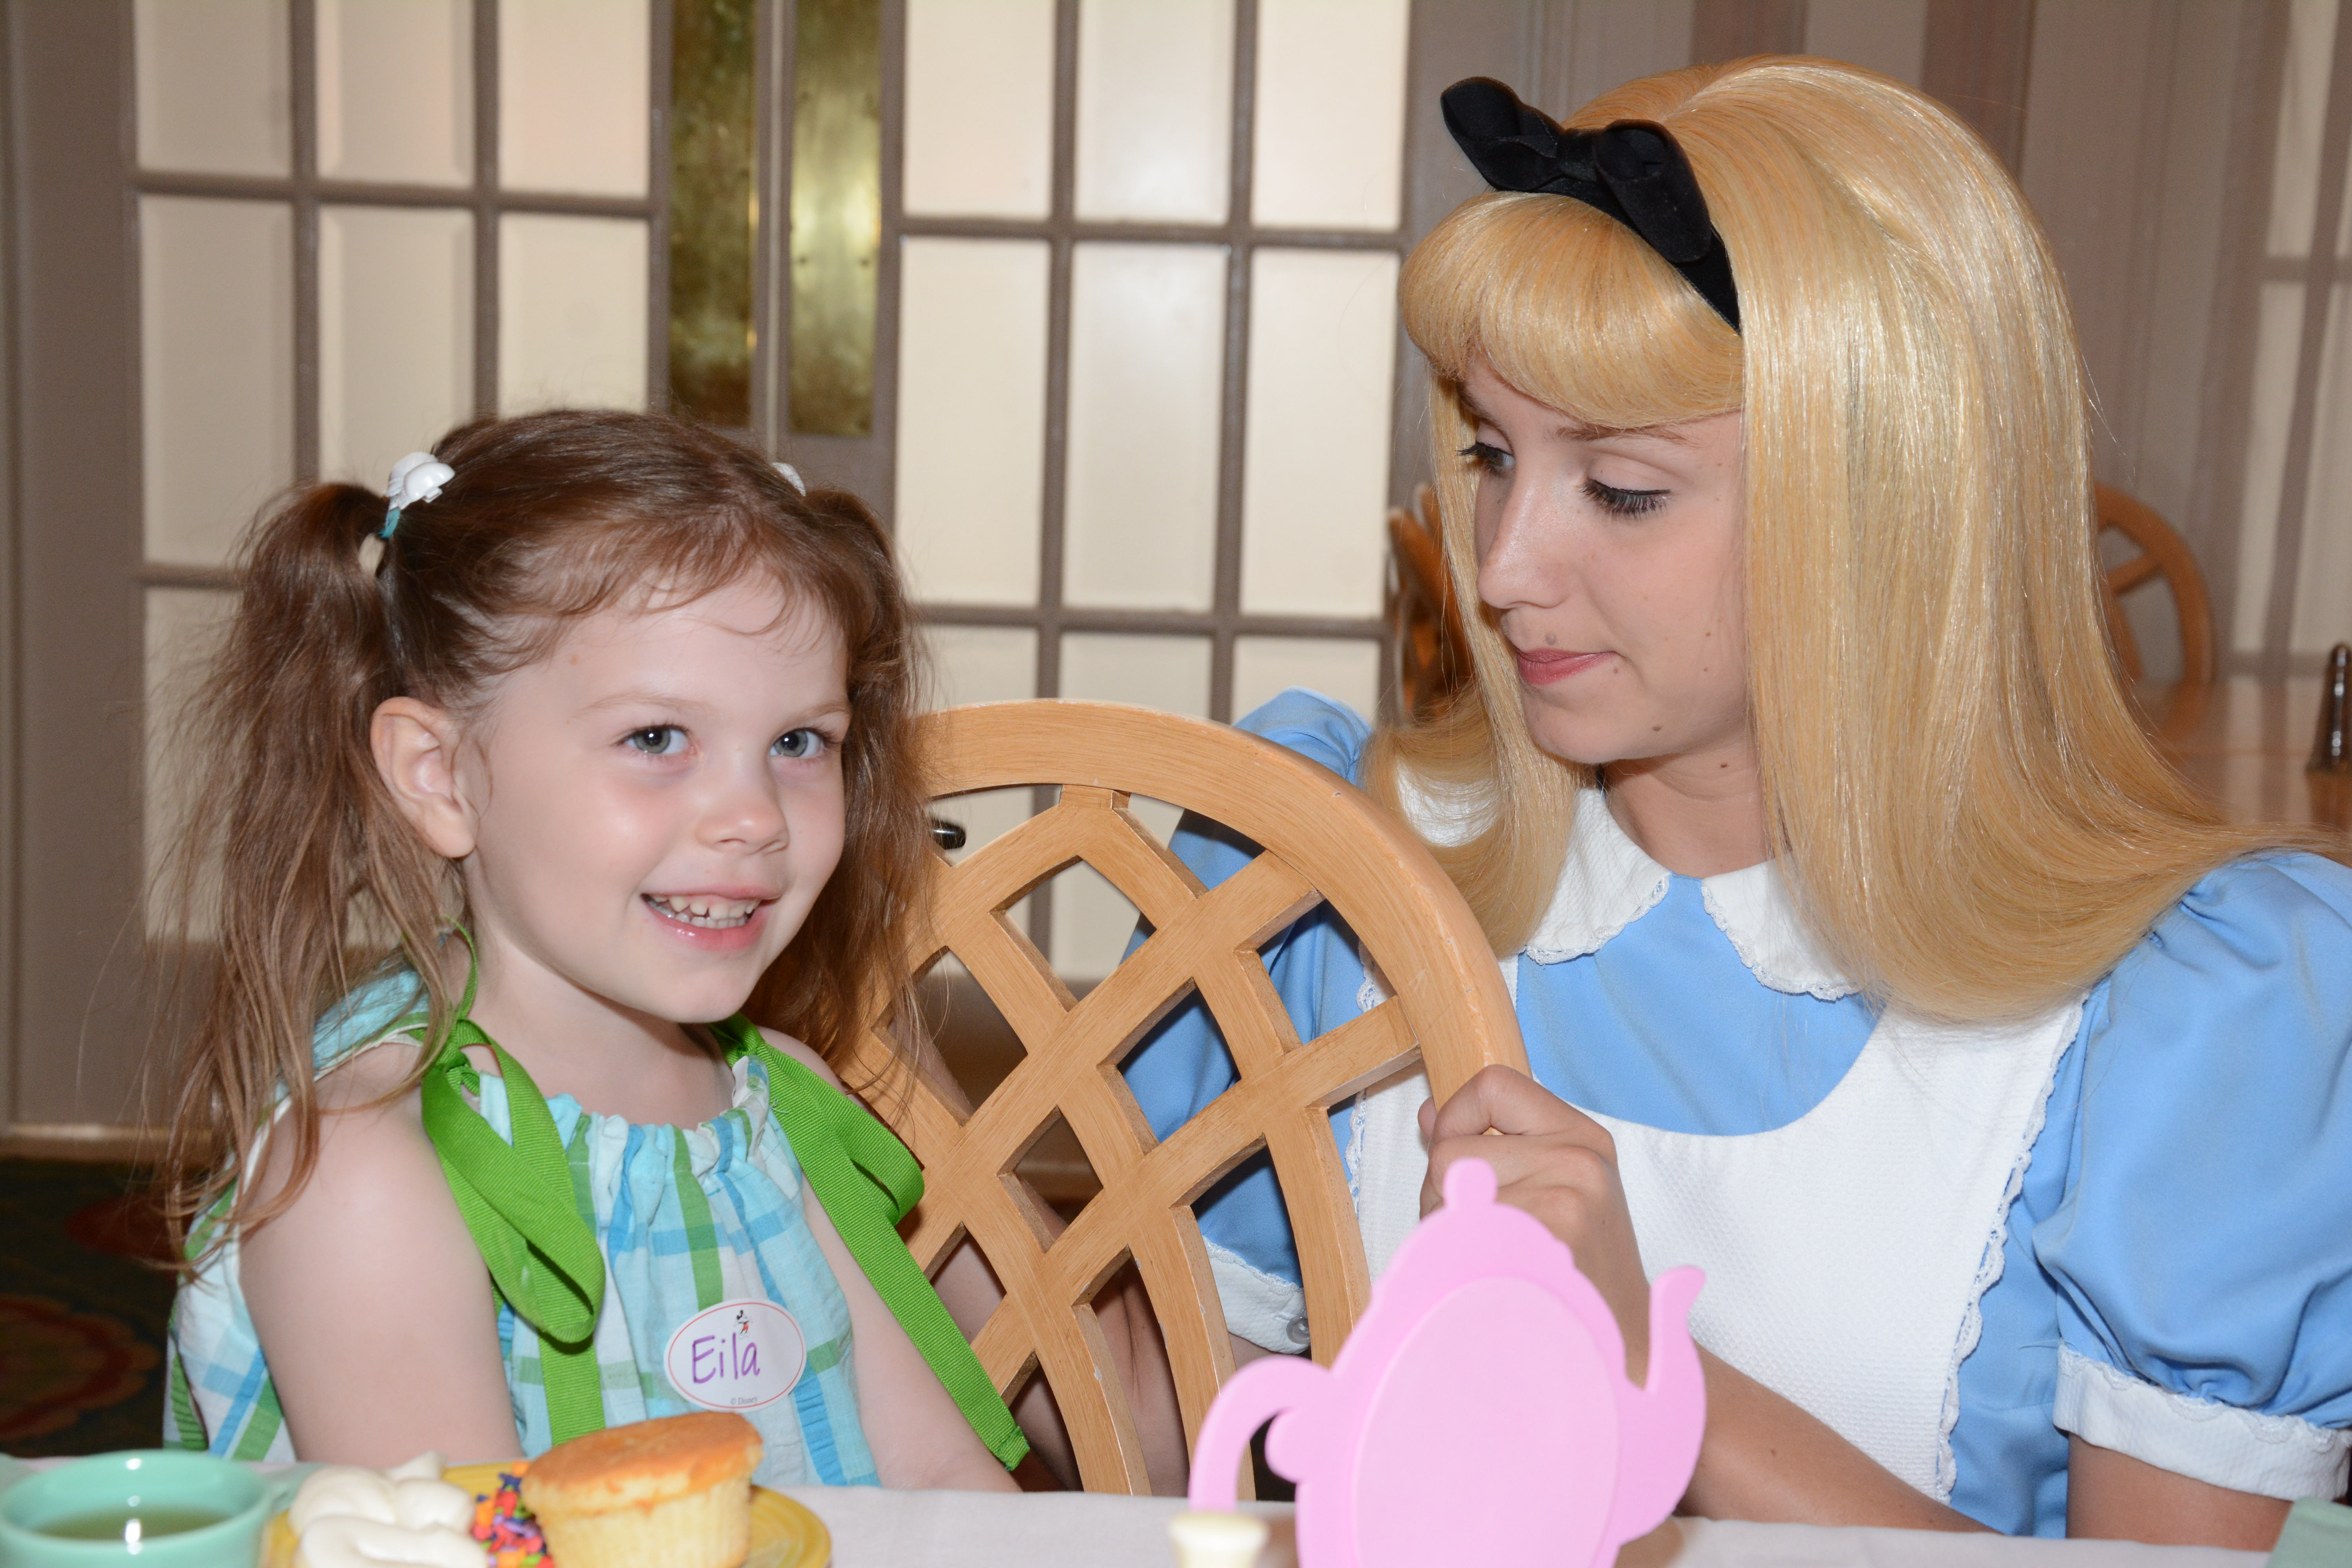 Celebrate Your Child’s Unbirthday at the Wonderland Tea Party